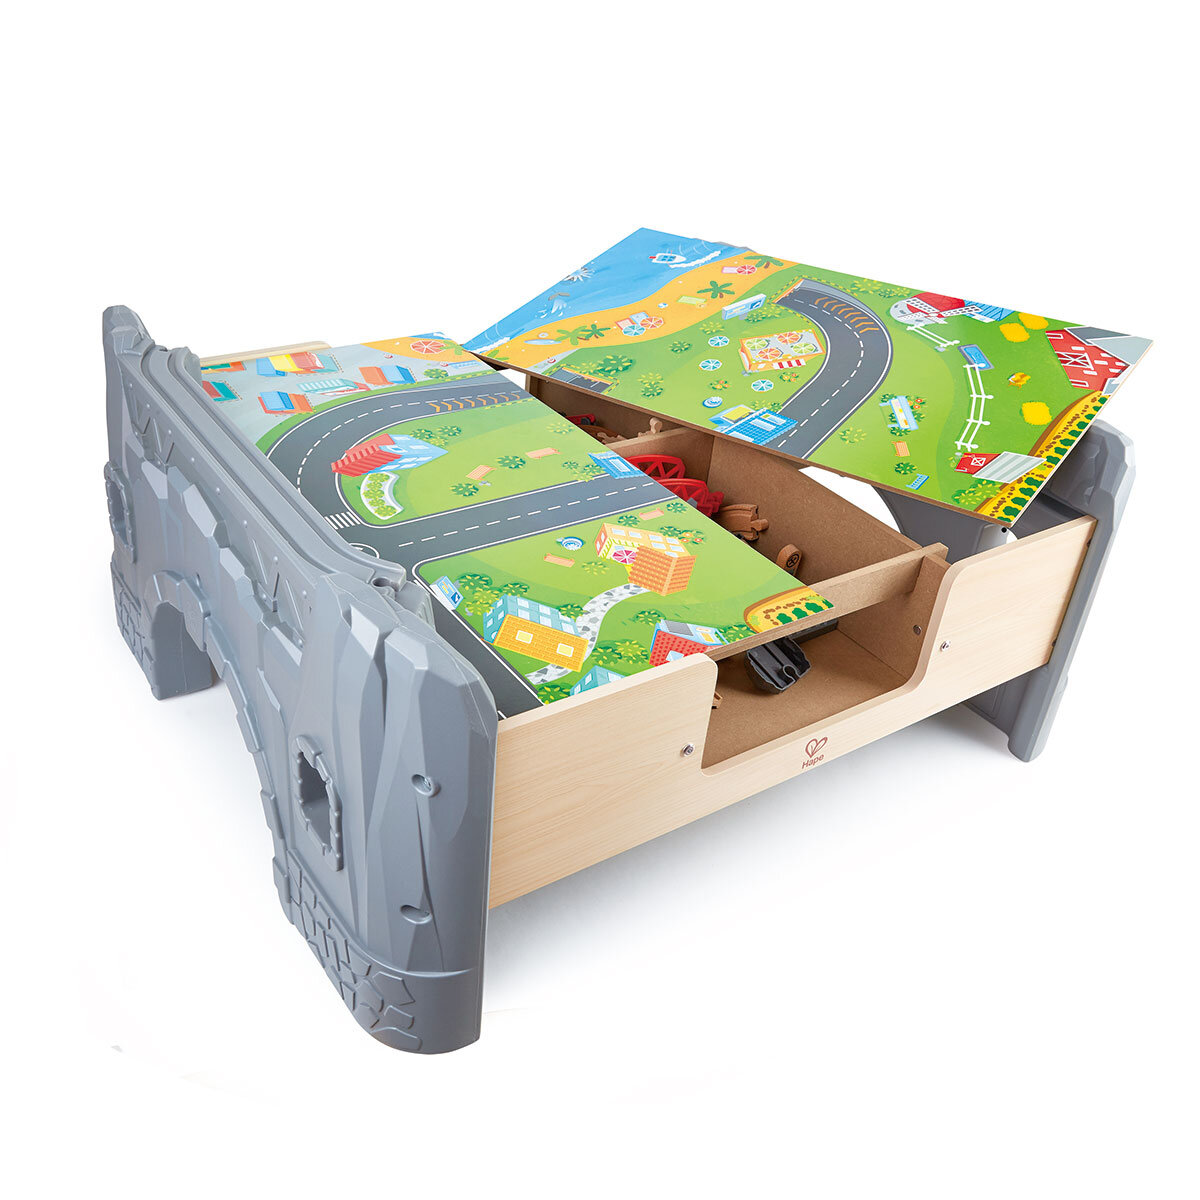 Buy Hape Railway Play Table Feature3 Image at Costco.co.uk